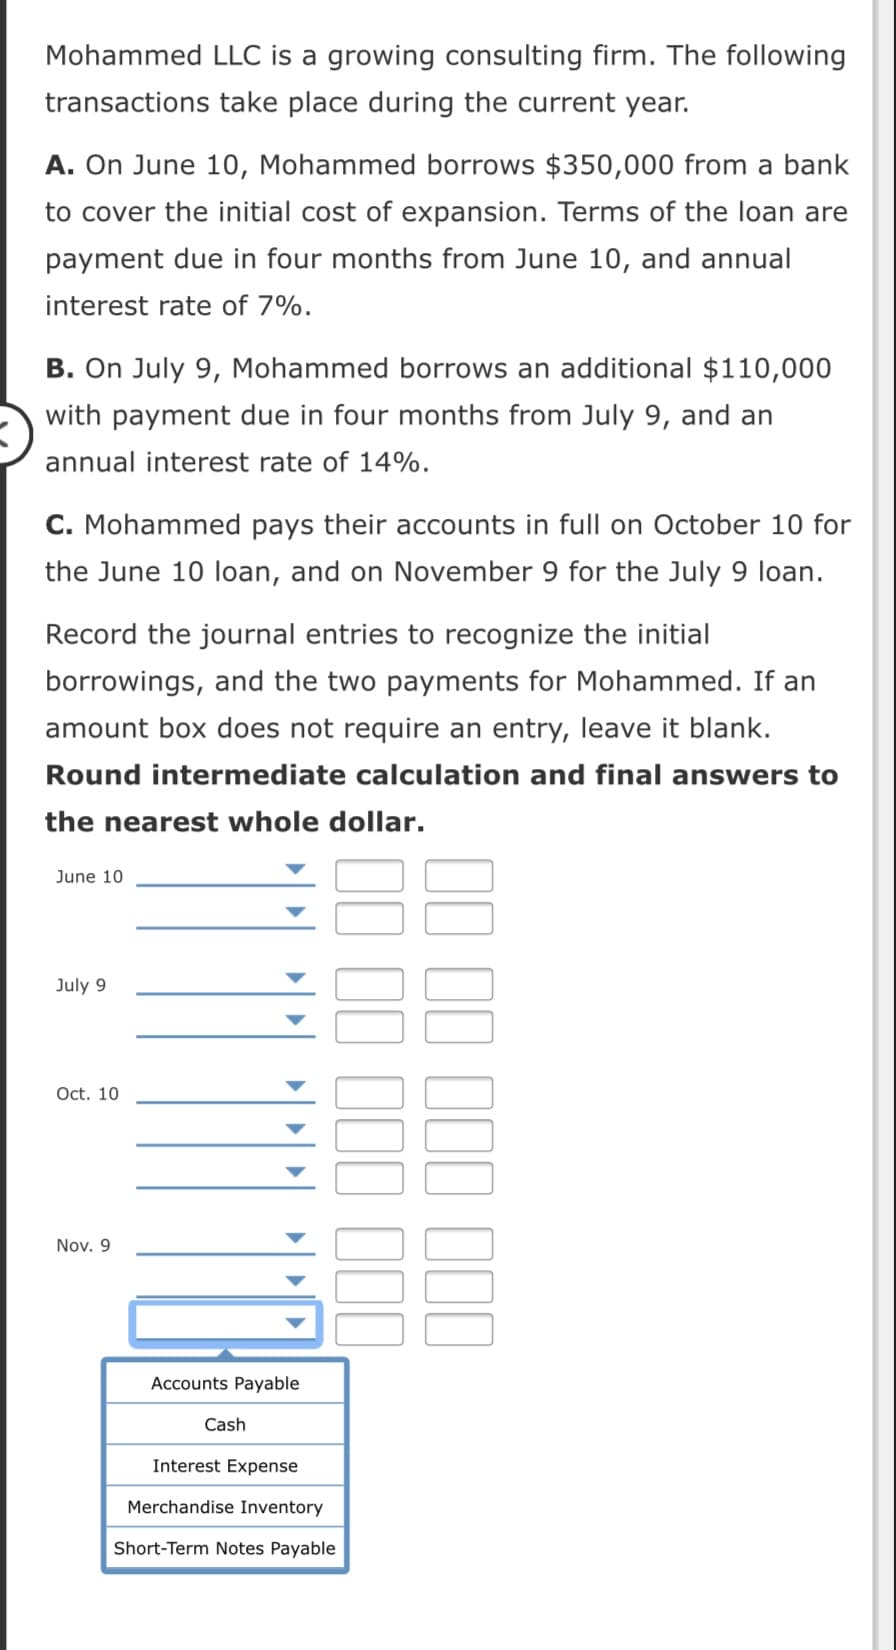 Mohammed LLC is a growing consulting firm. The following
transactions take place during the current year.
A. On June 10, Mohammed borrows $350,000 from a bank
to cover the initial cost of expansion. Terms of the loan are
payment due in four months from June 10, and annual
interest rate of 7%.
B. On July 9, Mohammed borrows an additional $110,000
with payment due in four months from July 9, and an
nnual interest rate of 14%.
C. Mohammed pays their accounts in full on October 10 for
the June 10 loan, and on November 9 for the July 9 loan.
Record the journal entries to recognize the initial
borrowings, and the two payments for Mohammed. If an
amount box does not require an entry, leave it blank.
Round intermediate calculation and final answers to
the nearest whole dollar.
June 10
July 9
Oct. 10
Nov. 9
Accounts Payable
Cash
Interest Expense
Merchandise Inventory
Short-Term Notes Payable
II II III III
II II III II
